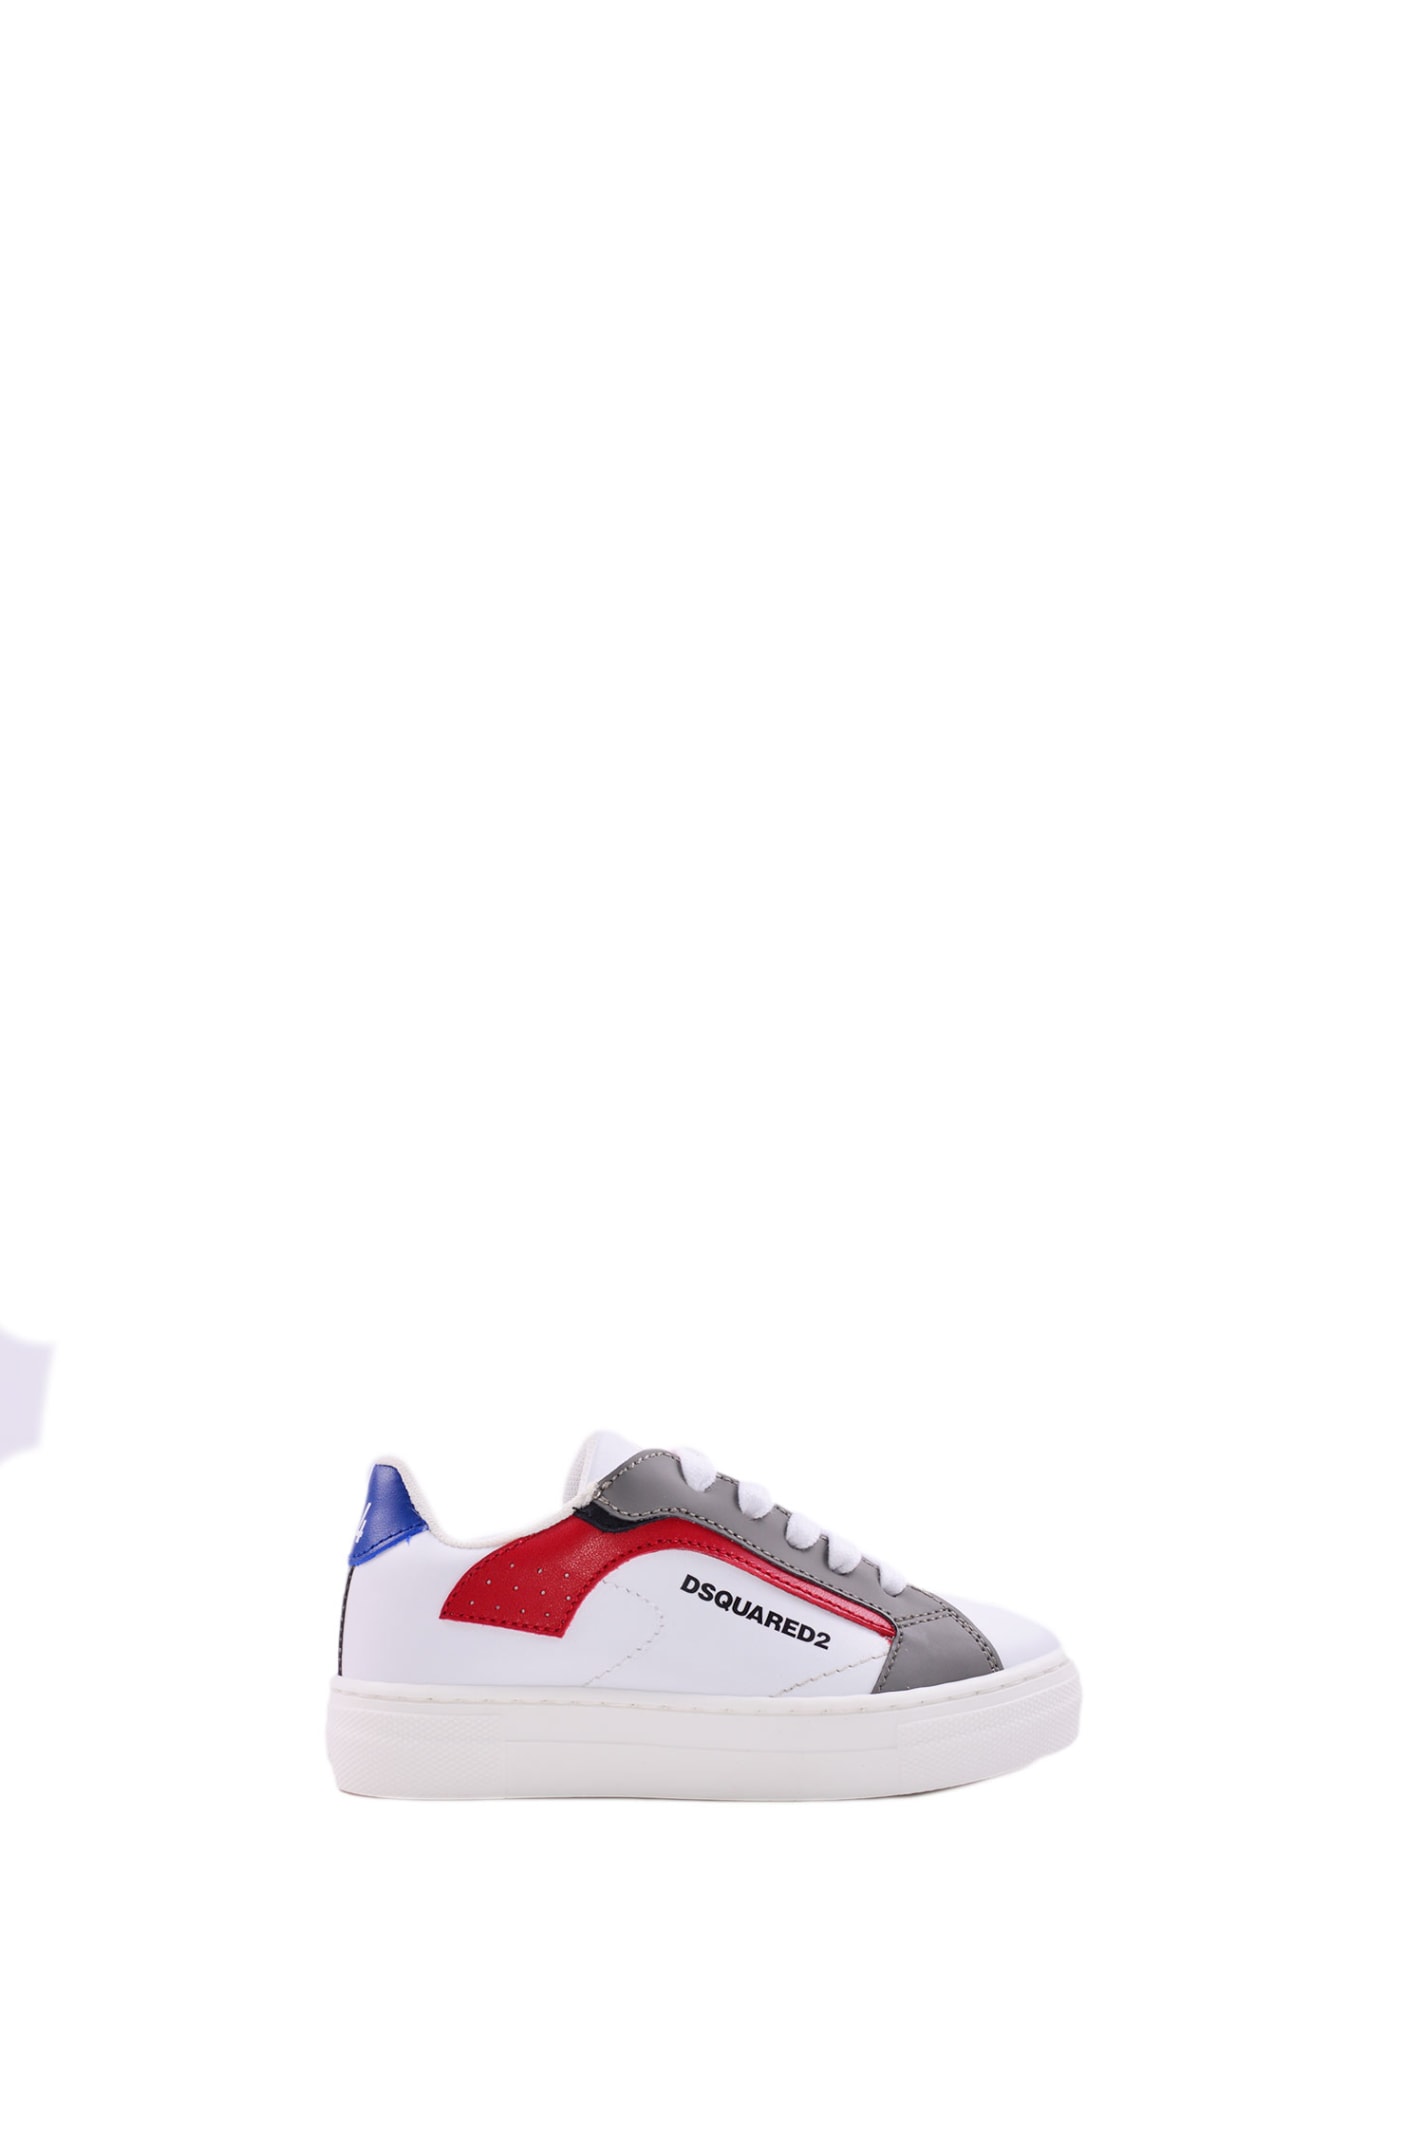 Dsquared2 Leather And Fabric Sneakers